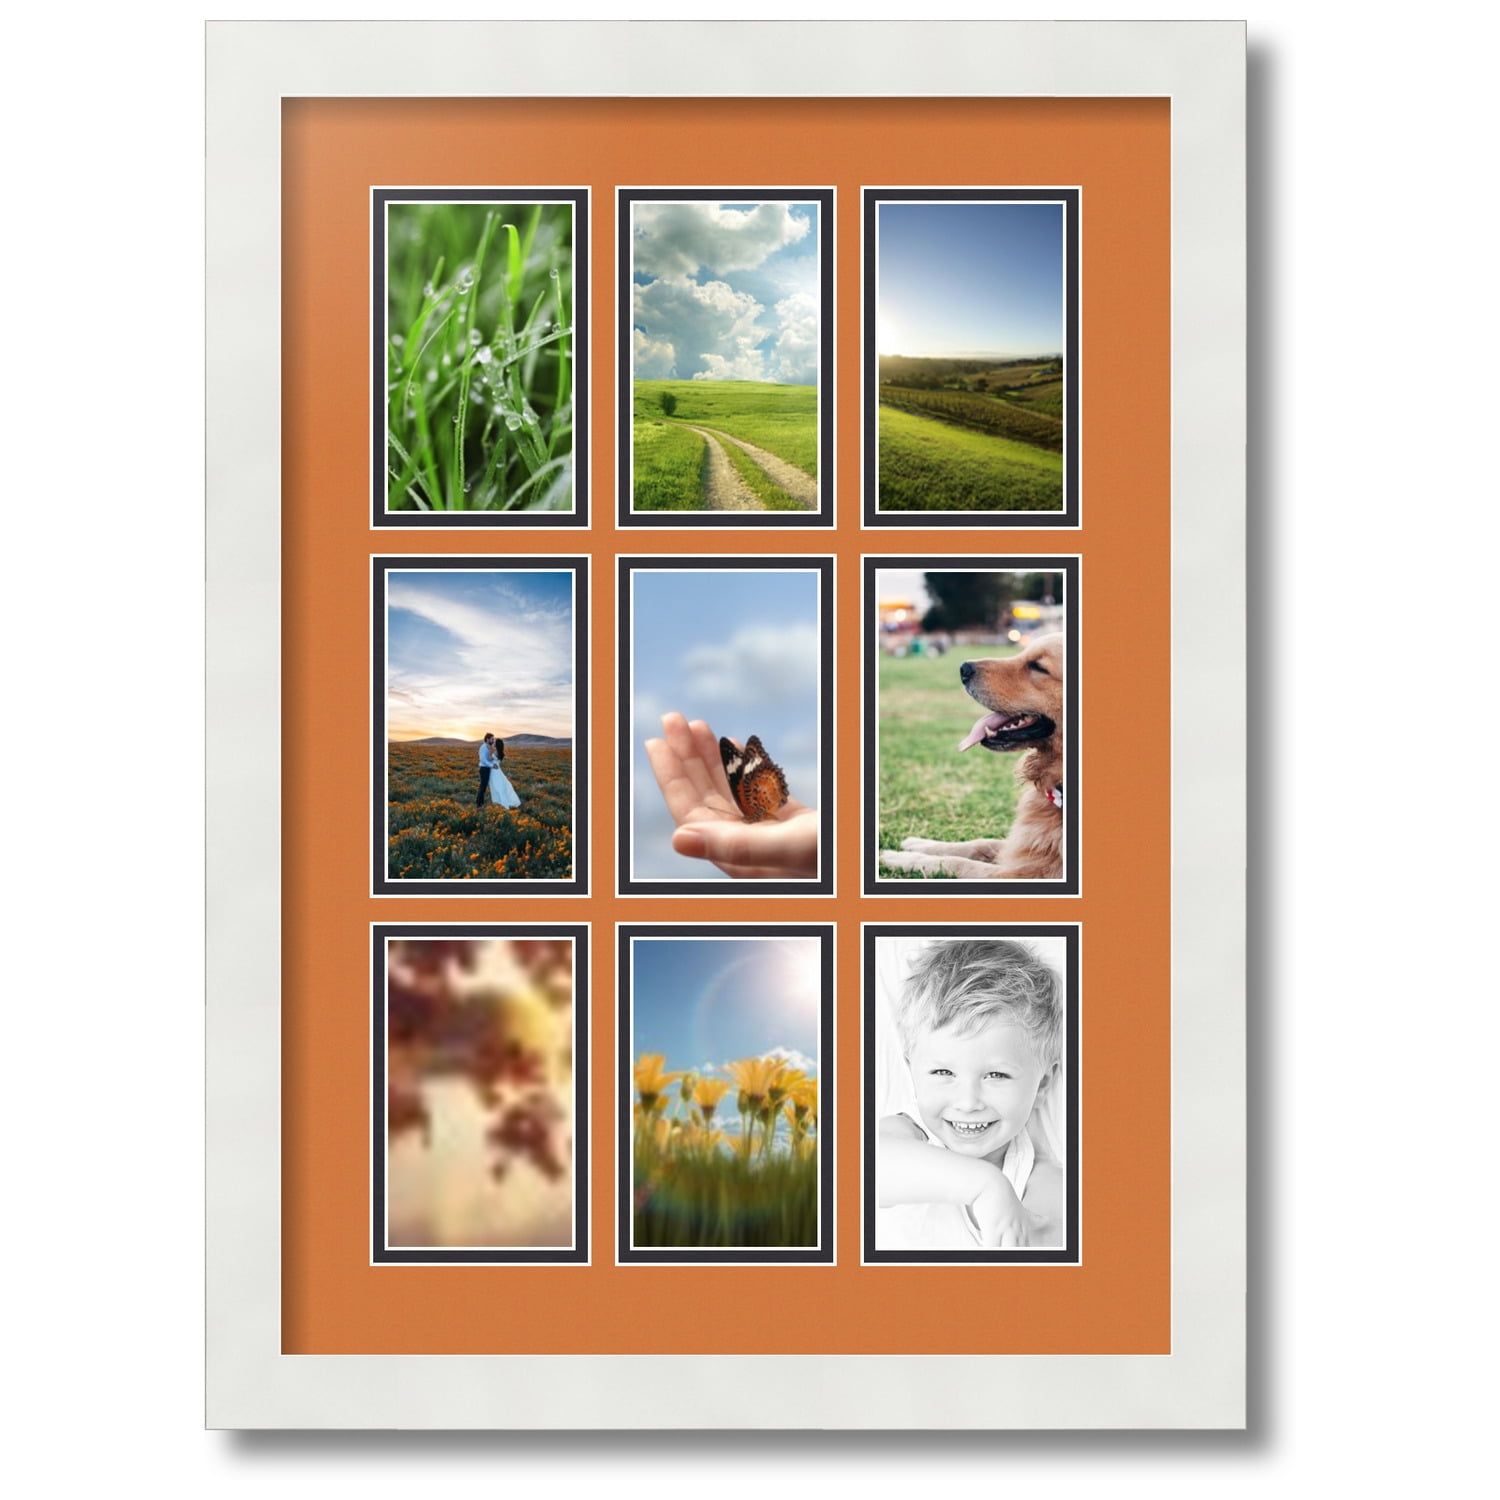 Modern Collage Picture Frames Wall Decor - 17.5x23.5 White Finish Photo  Collage Frame with White Mat For Nine 5x7 Photos , Includes UV Resistant